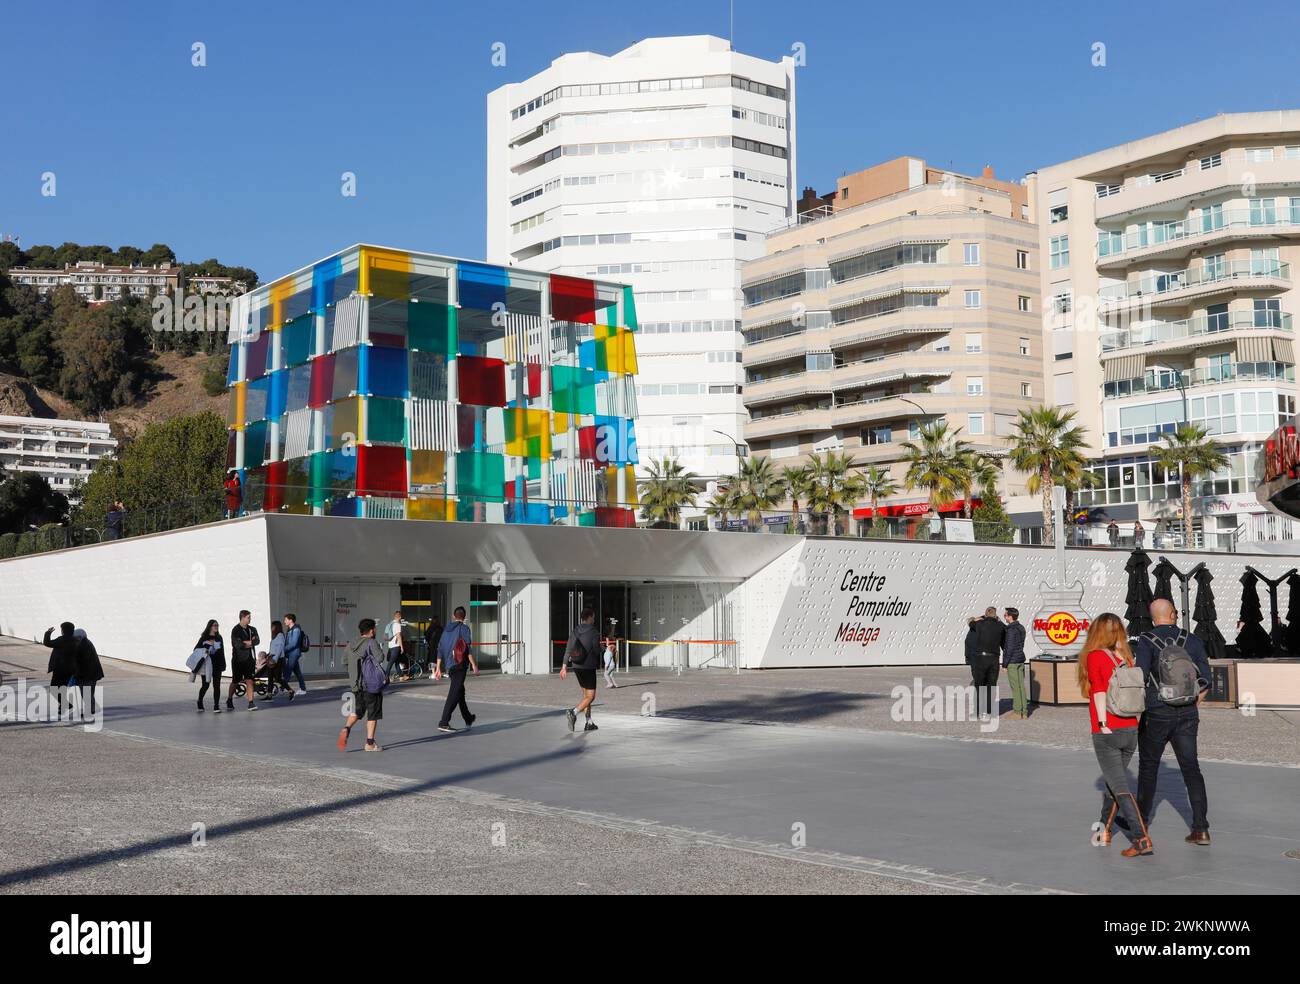 Centre Pompidou of Malaga, Costa del Sol. The El Cubo cultural centre exhibits works of art from the collection of the Paris museum, 11.02.2019 Stock Photo